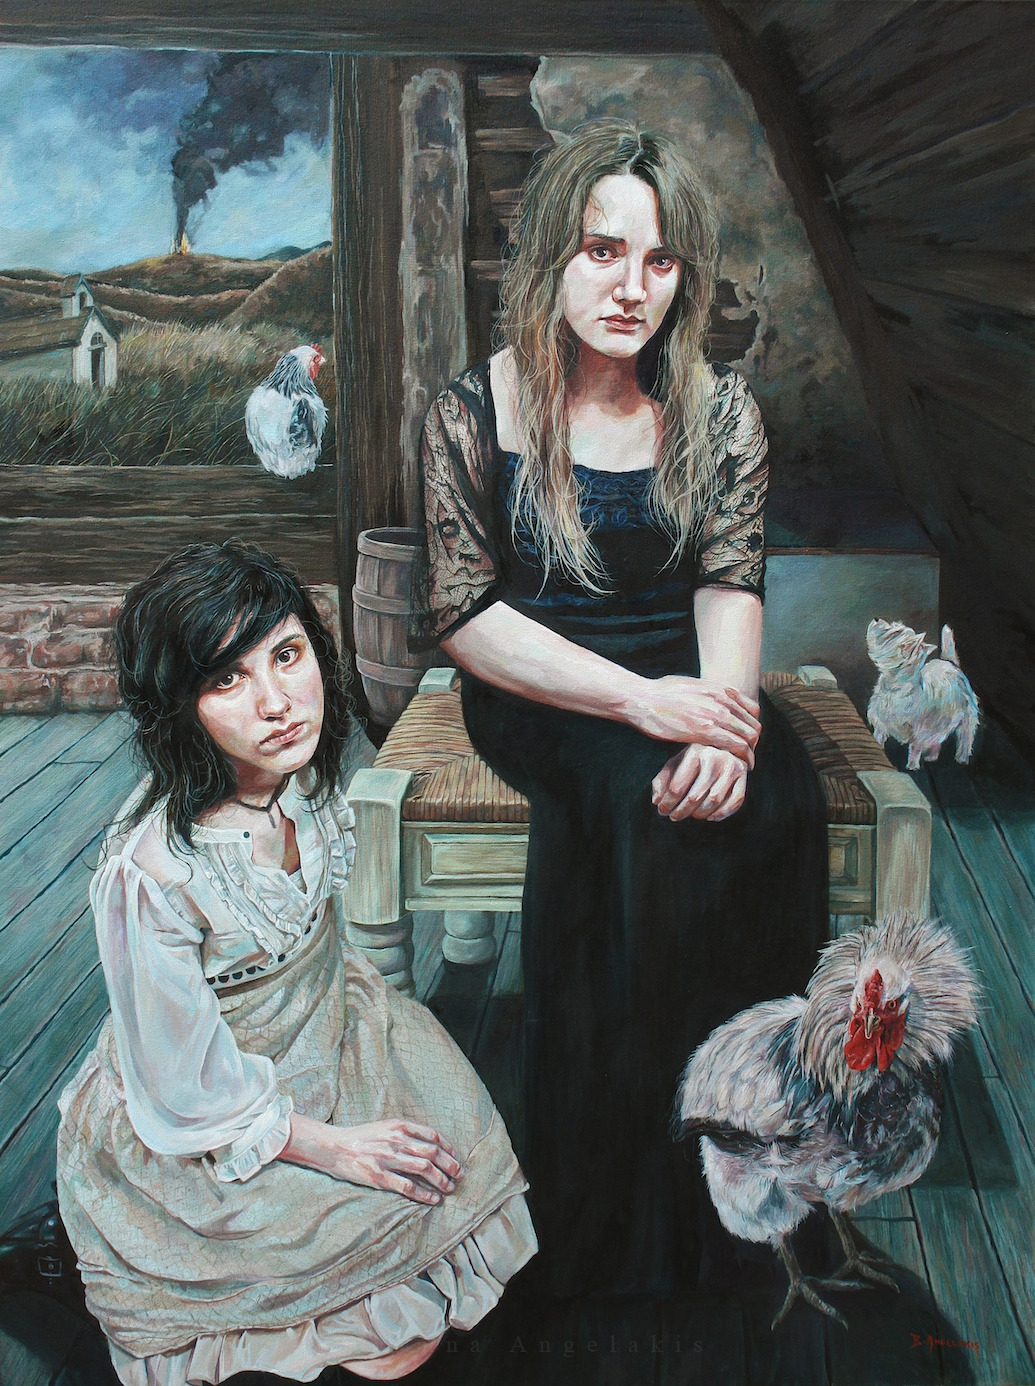 The Witch’s Familiars by Brianna Angelakis 36" x 48" // oil on canvas Website // Tumblr // Facebook // Etsy